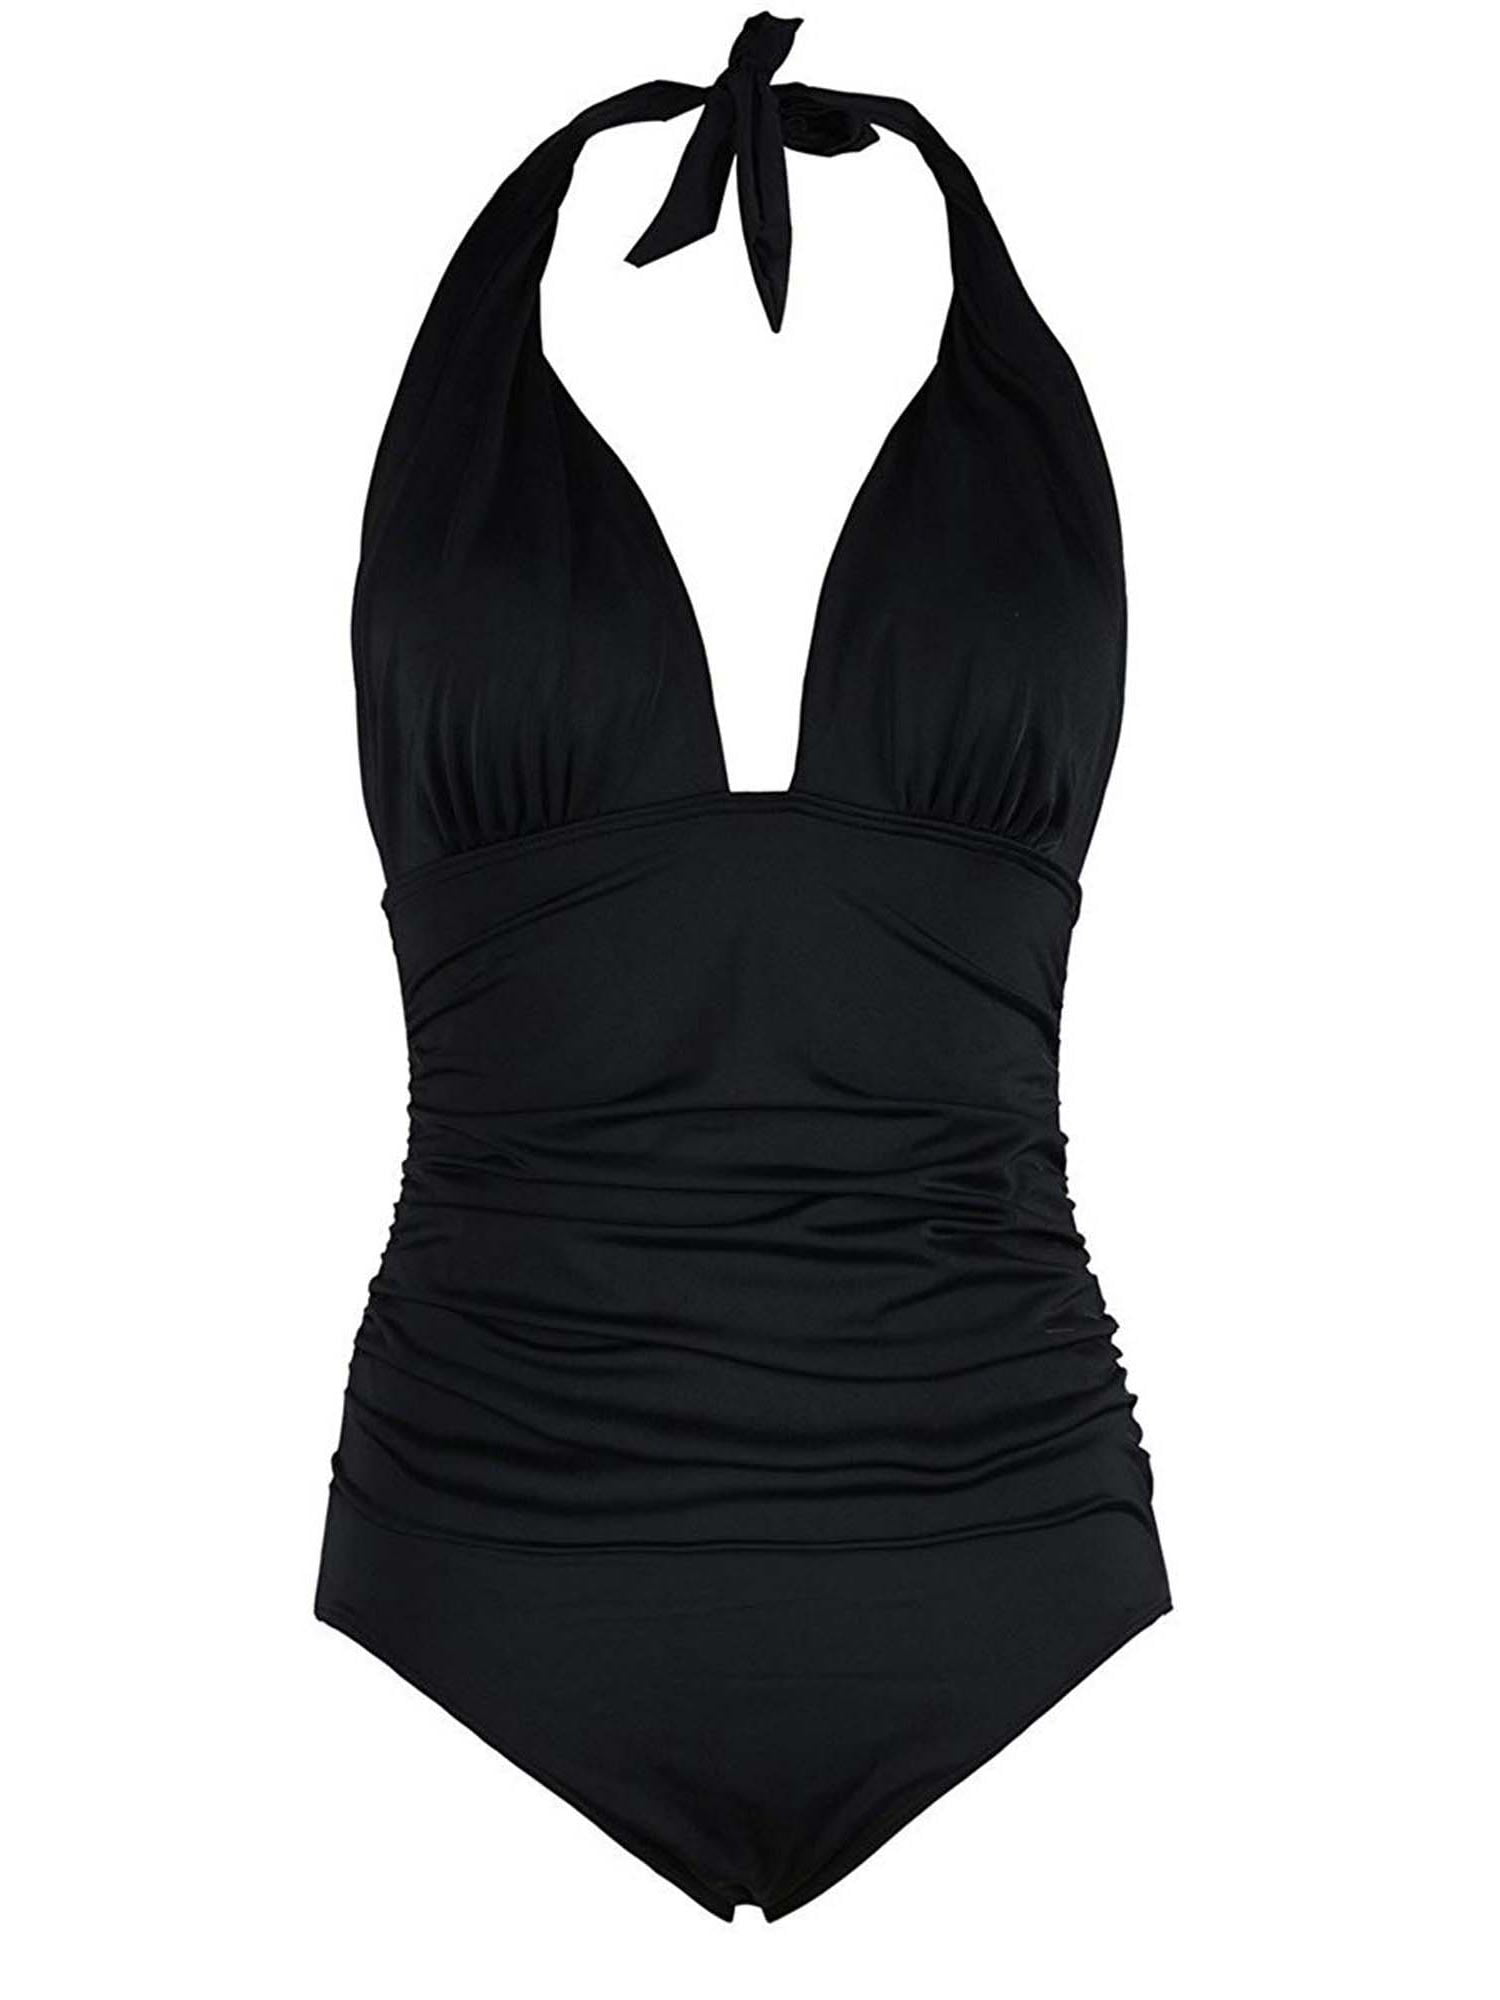 Womens Plus Size One Piece Swimsuit- Plunging Shirred Deep V Tie Back ...